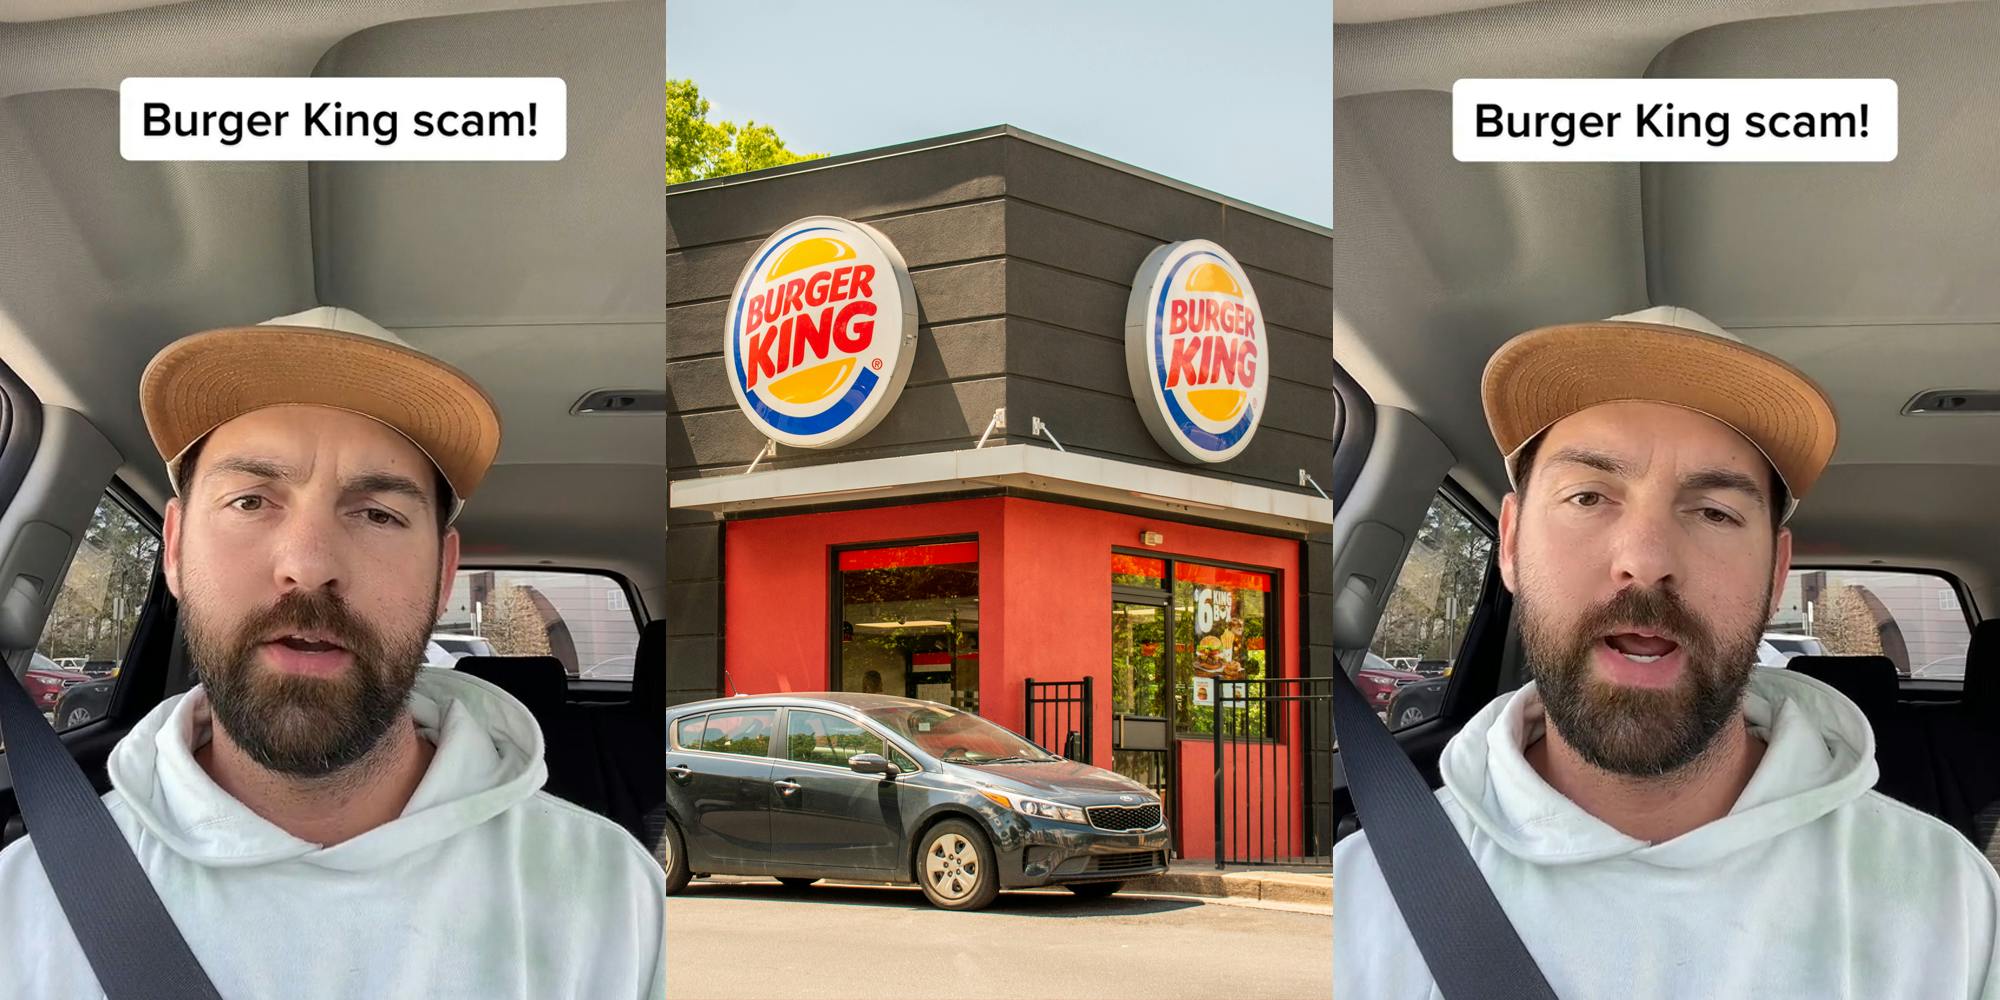 Burger King customer speaking in car with caption "Burger King Scam!" (l) Burger King building with signs (c) Burger King customer speaking in car with caption "Burger King Scam!" (r)